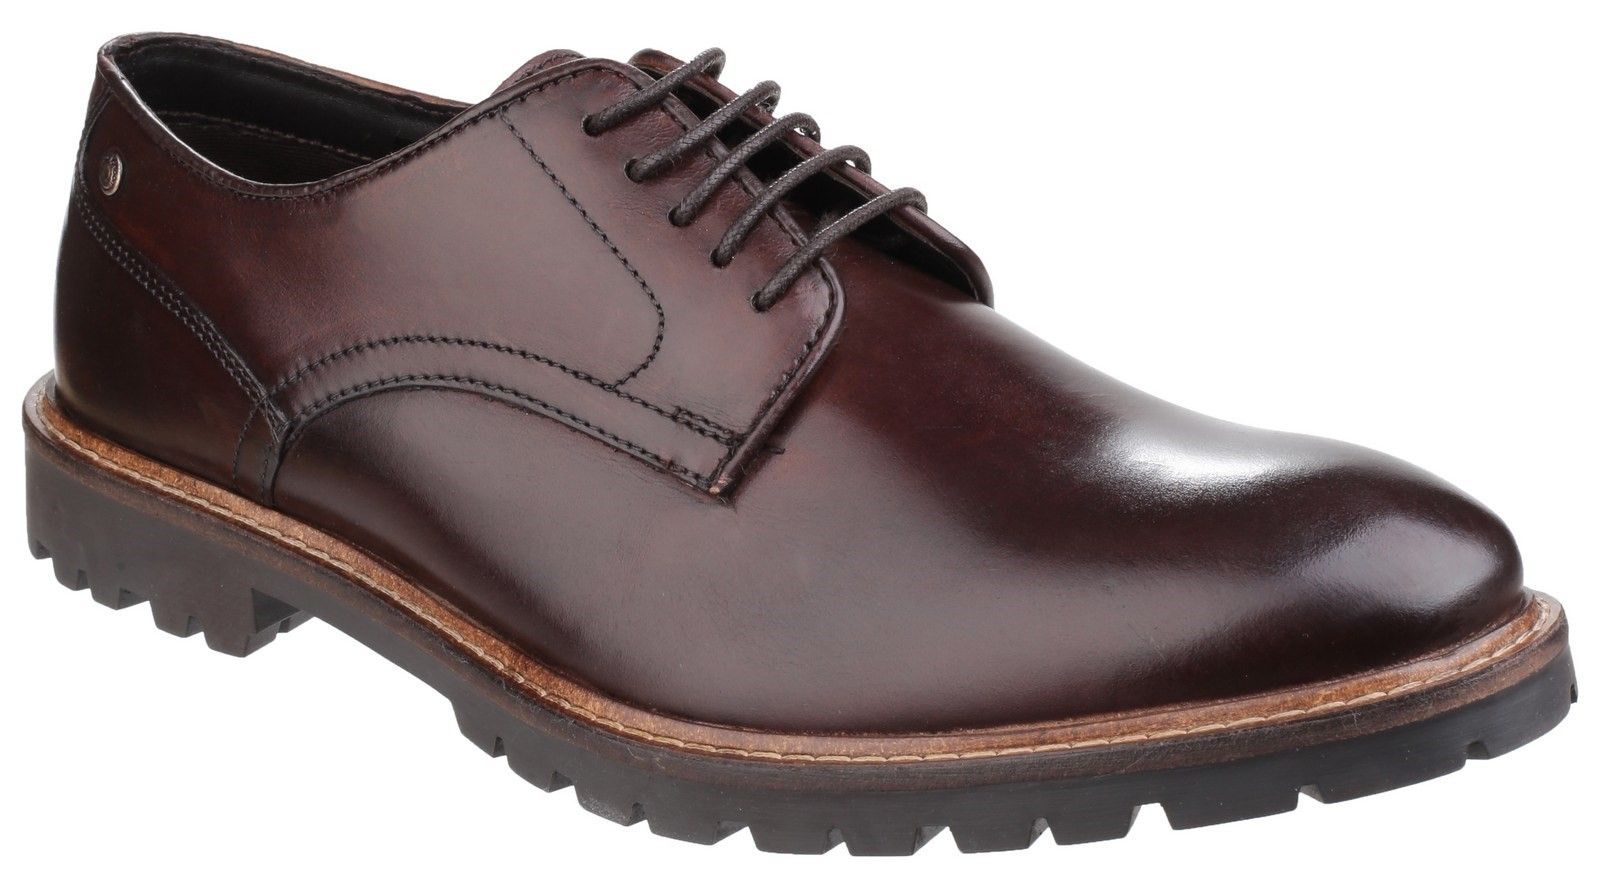 Make a confident statement with this Base London Barrage Derby shoe. With mixed leather uppers and contrast stitching around the commando style sole, it's a confident shoe that offers comfort and versatility. Plain toe derby. 
Cleeted commando sole. 
Comfortable with good grip.